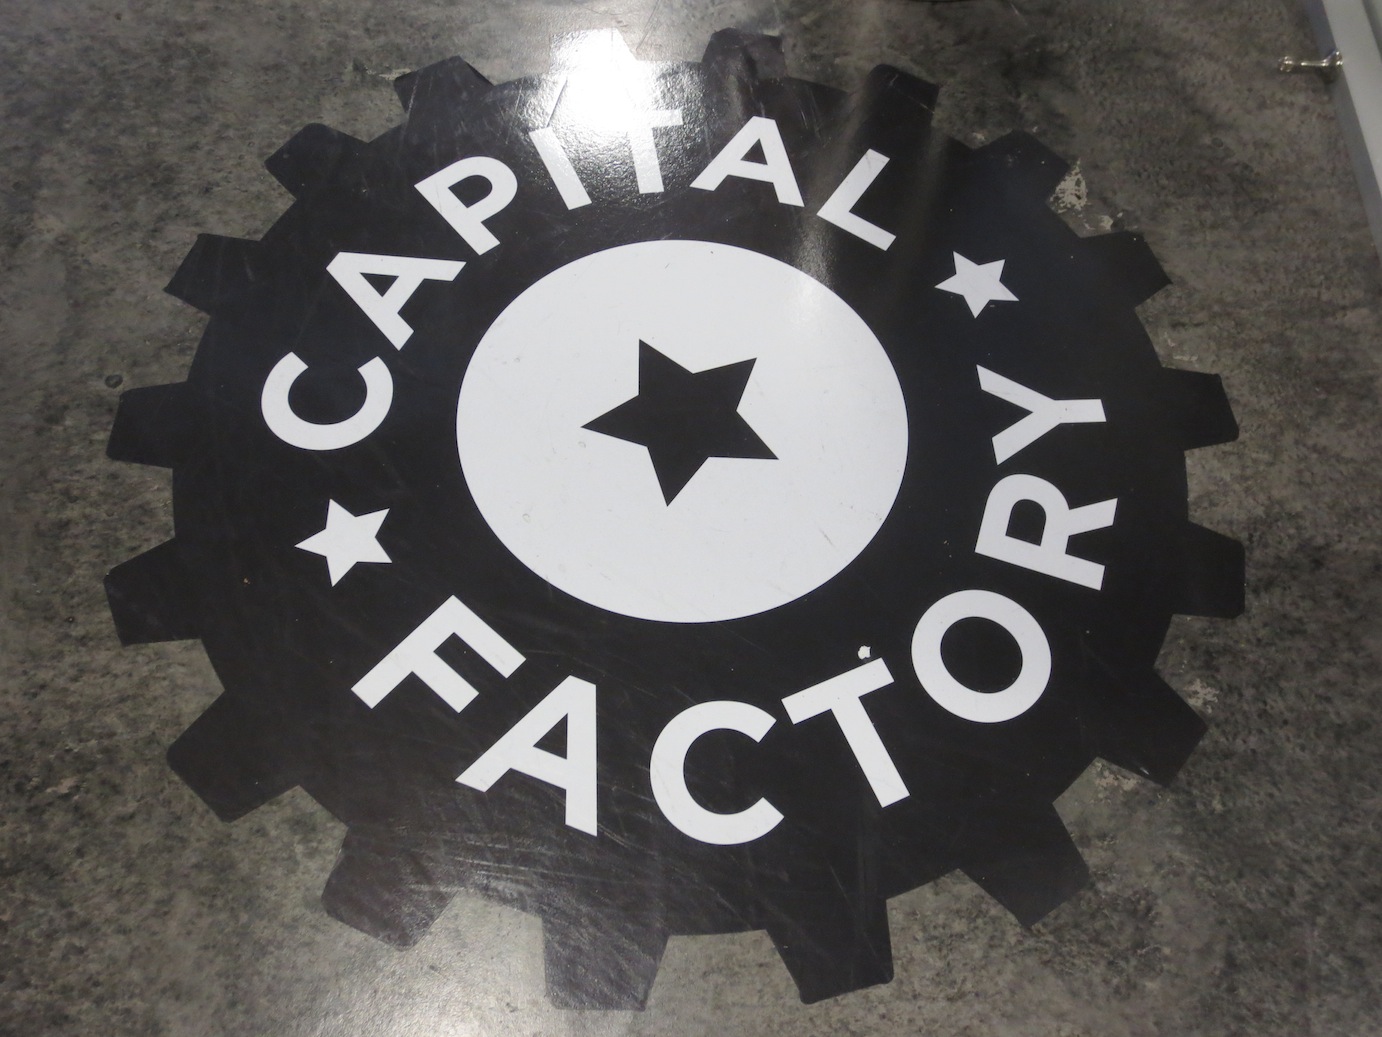 The logo for Capital Factory on the floor of their working space